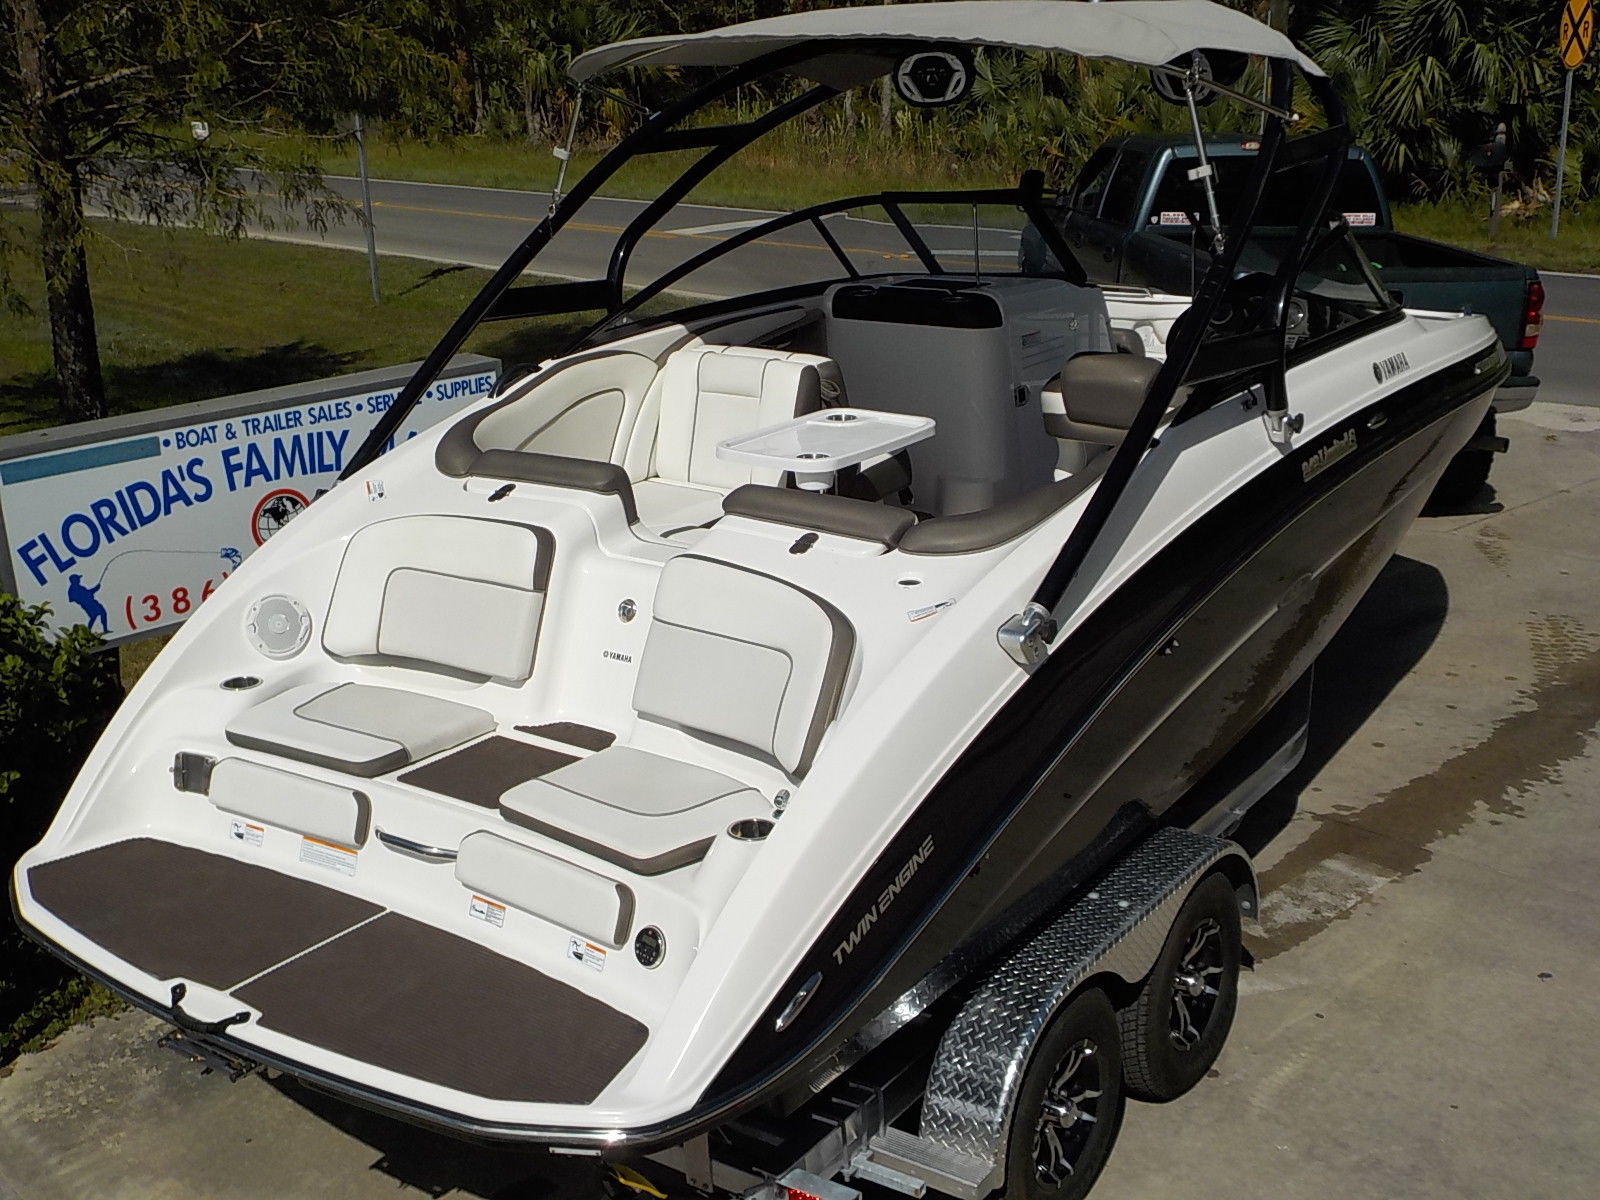 yamaha-242-limited-s-2014-for-sale-for-39-900-boats-from-usa